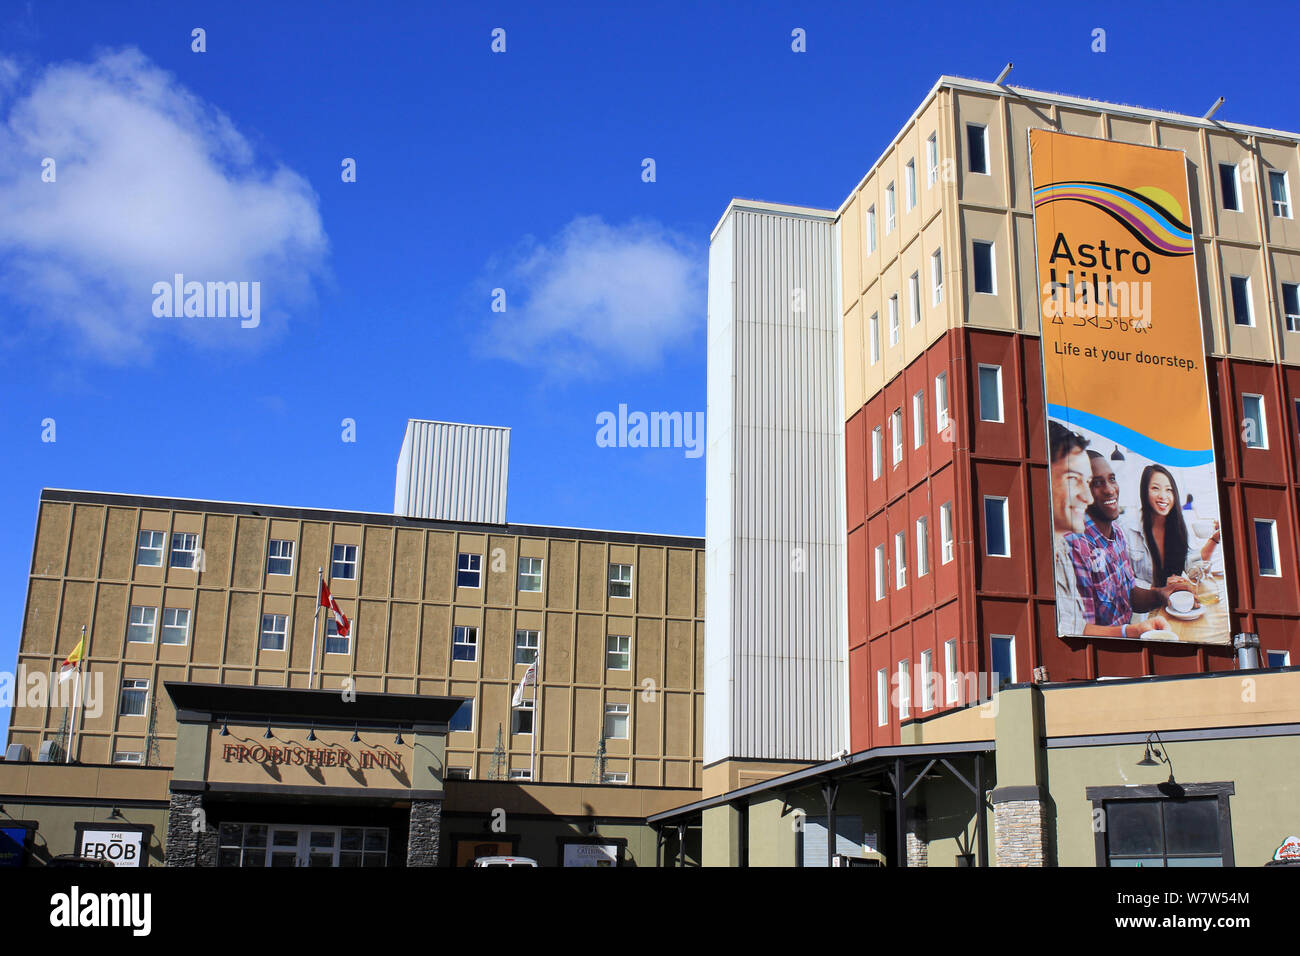 Frobisher Inn Hotel At The Astro Hill Complex, Iqaluit, Canada Stock Photo